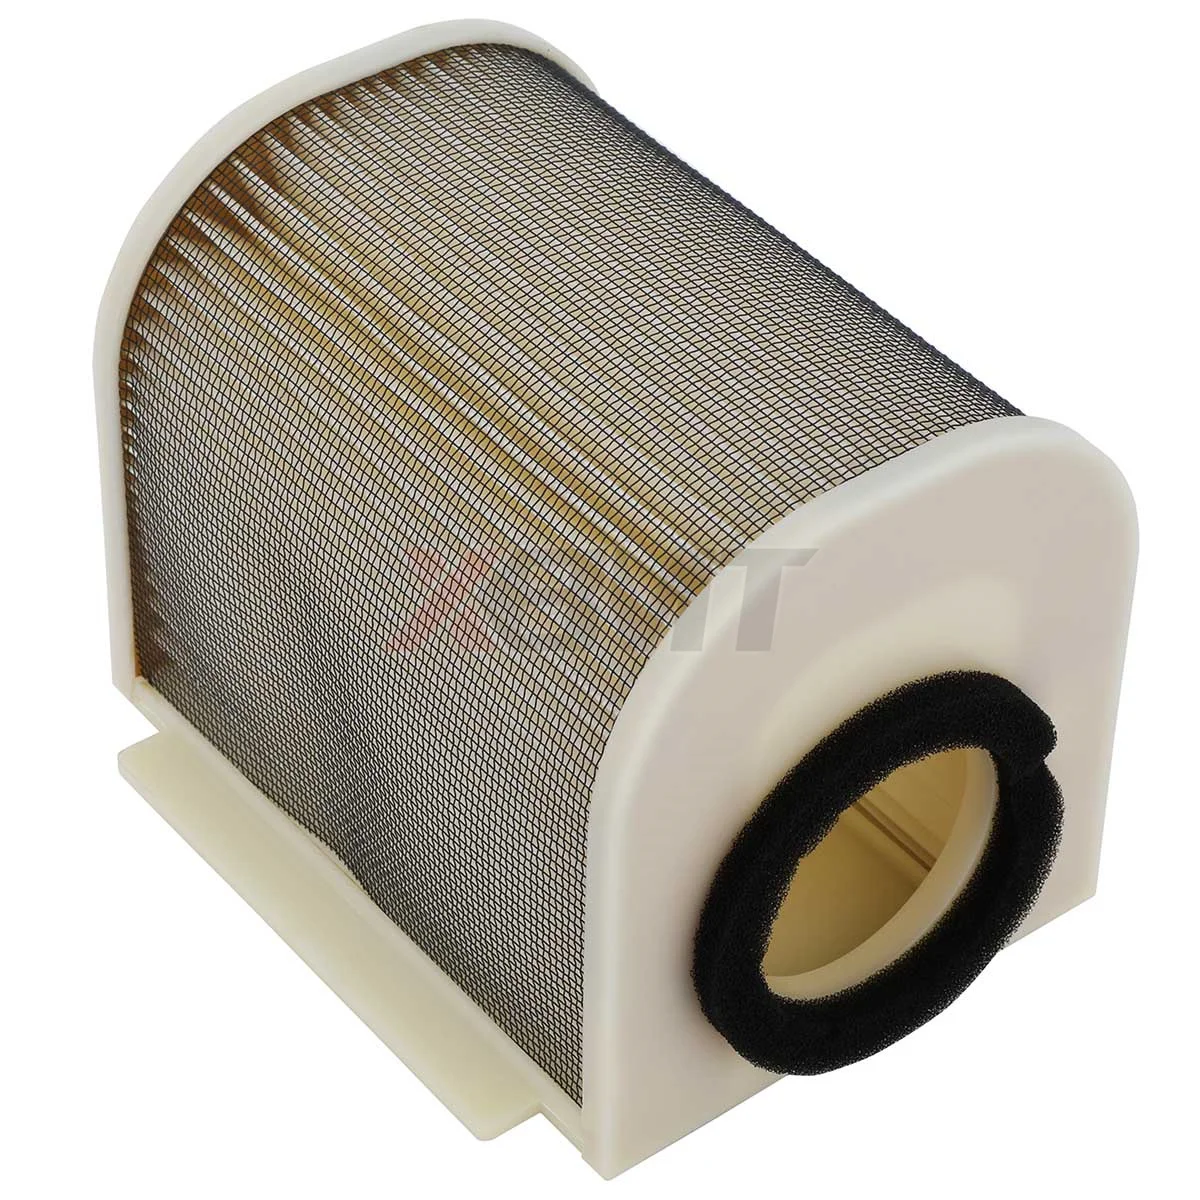 

Motorcycle Air Filters For Yamaha XJR1200 1994-1998 XJR1200 SP 1997-1998 XJR1300 1998-2006 XJR1300 SP 1999-2001 2004 XJR1300R 03